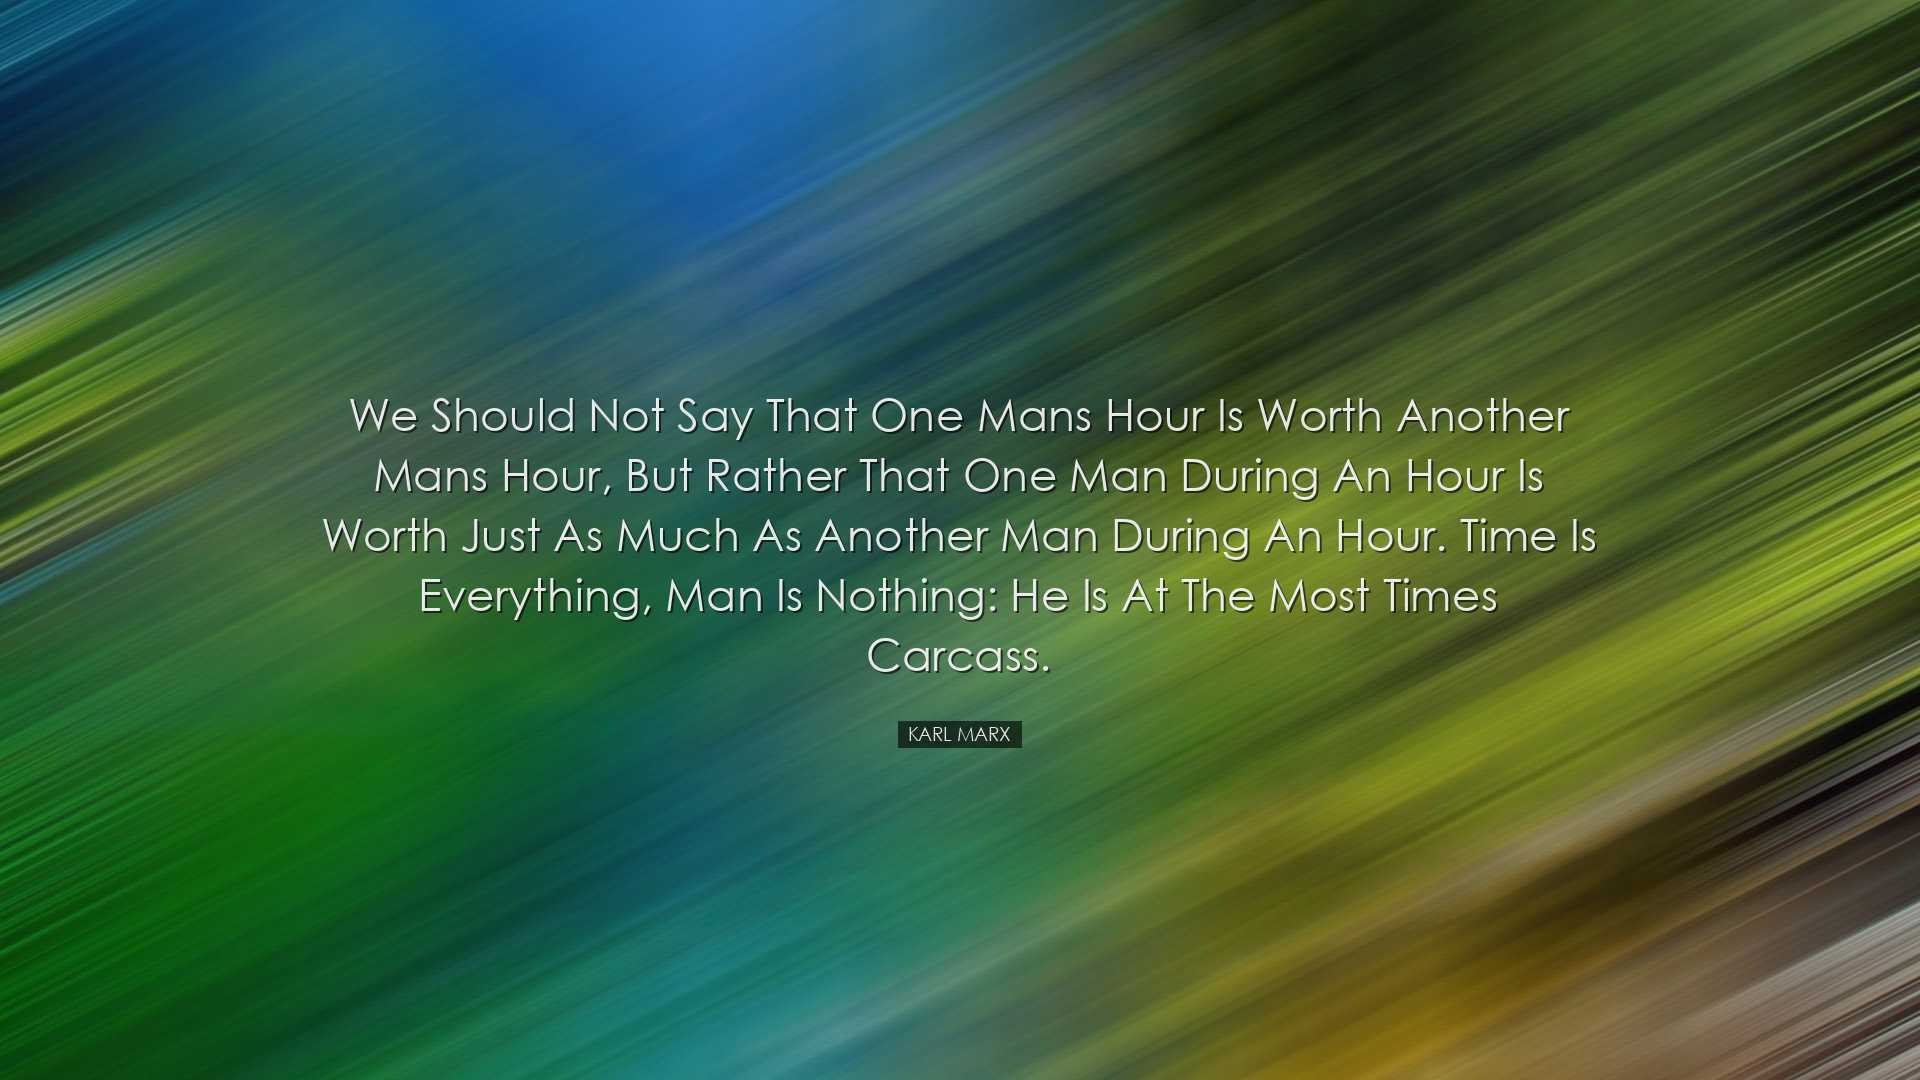 We should not say that one mans hour is worth another mans hour, b